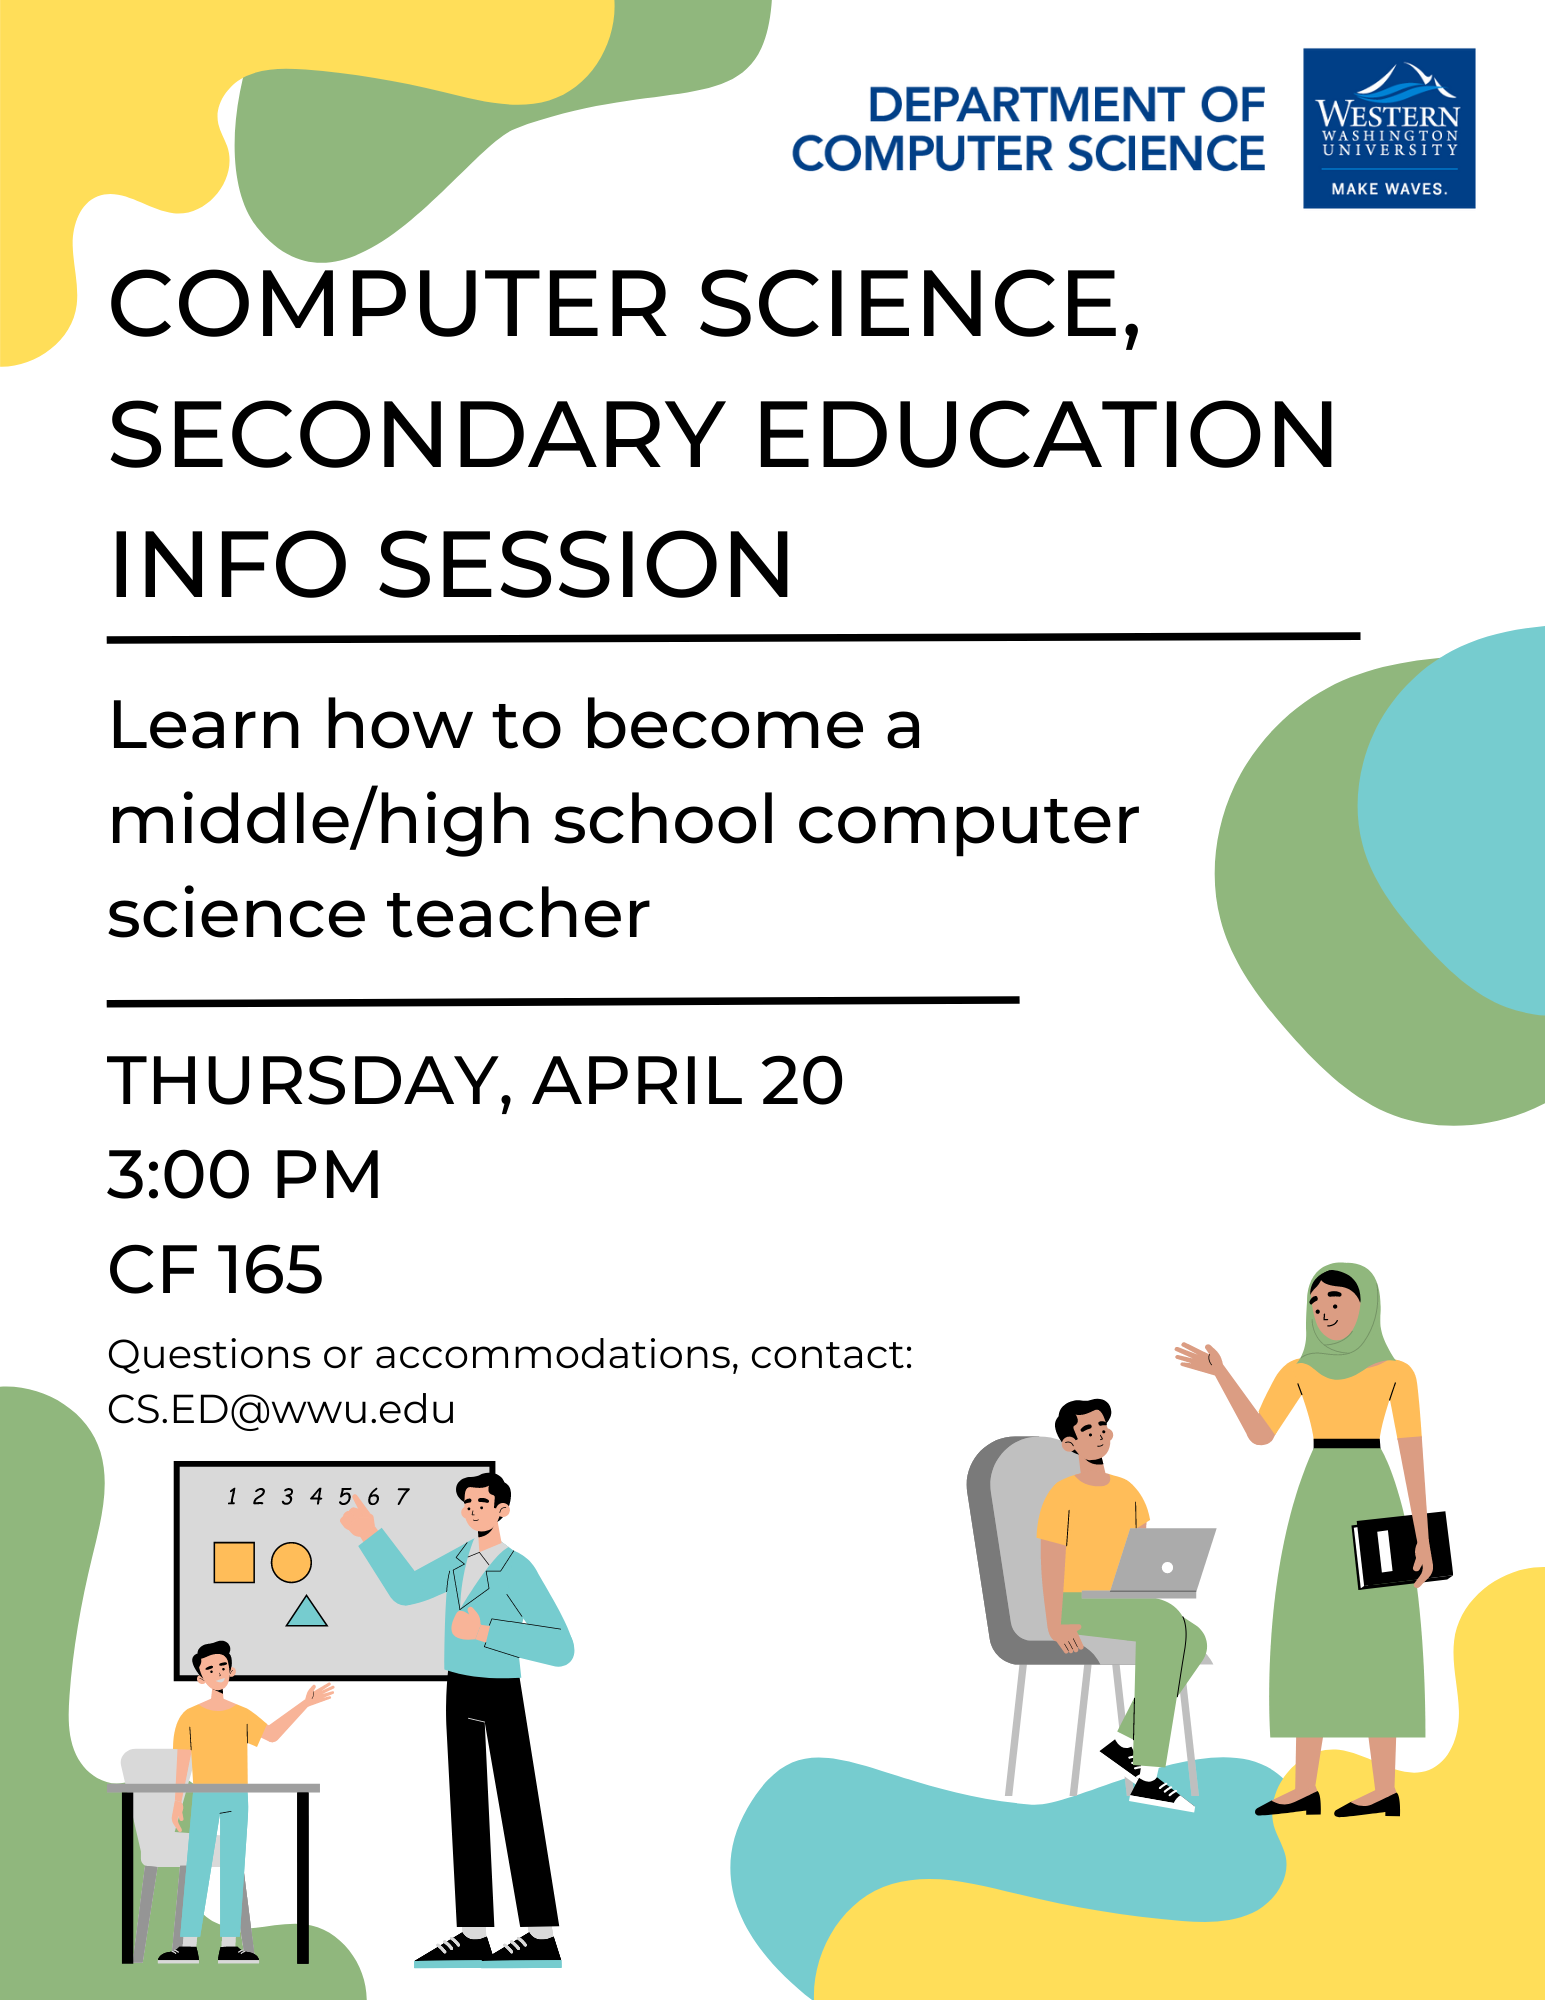 Learn how to become a middle/high school Computer Science teacher! Thursday, April 20 at 3:00 PM in CF 165.